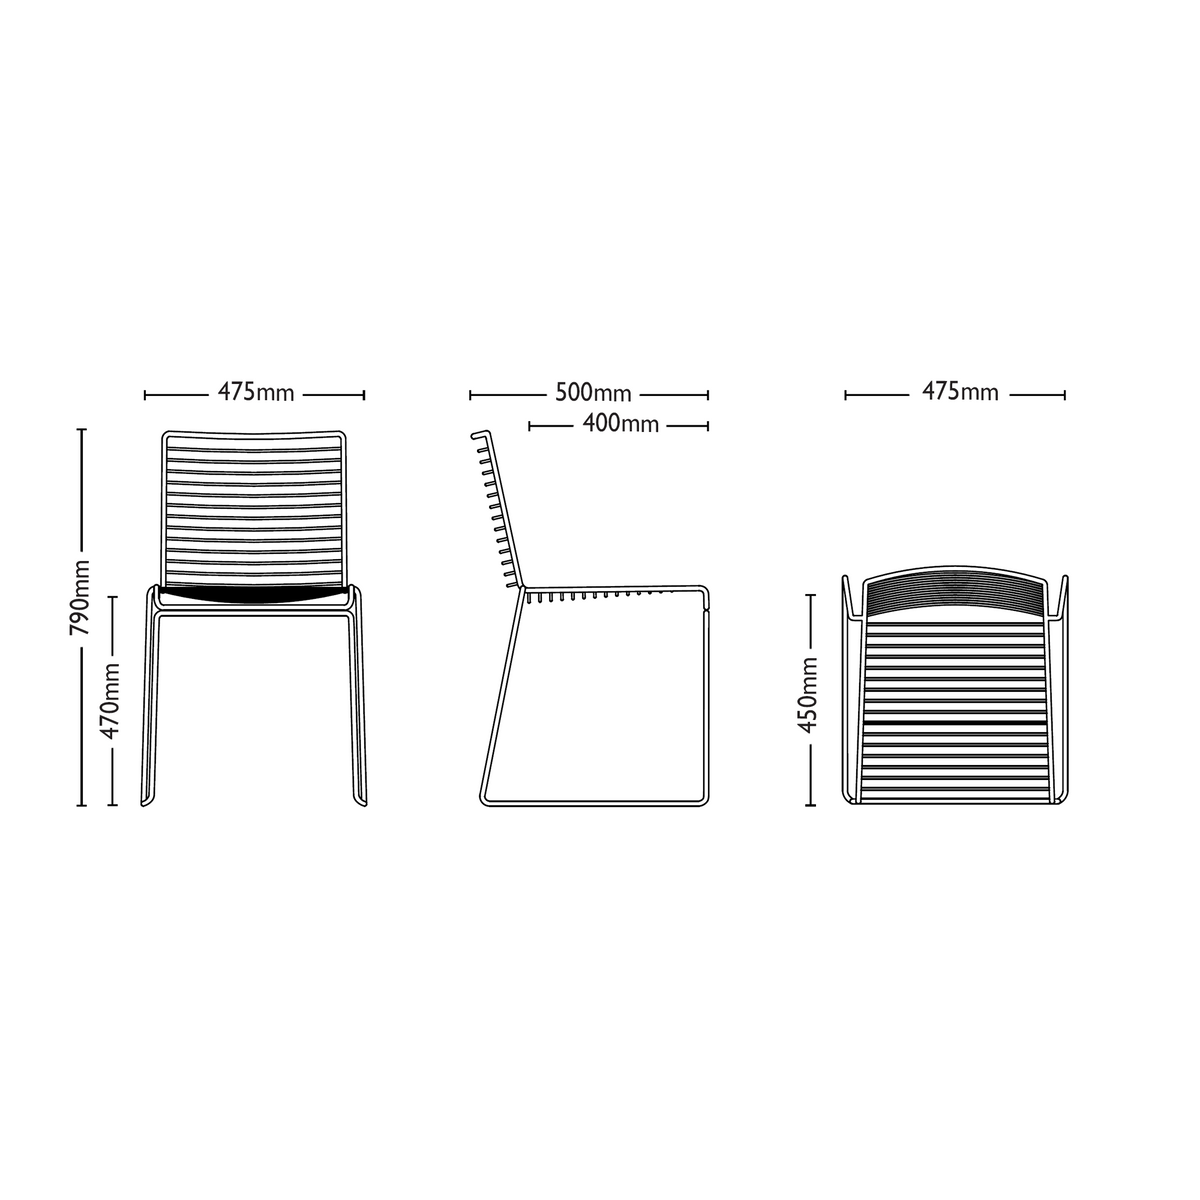 Dimensions for HAY Hee Dinning Chairs